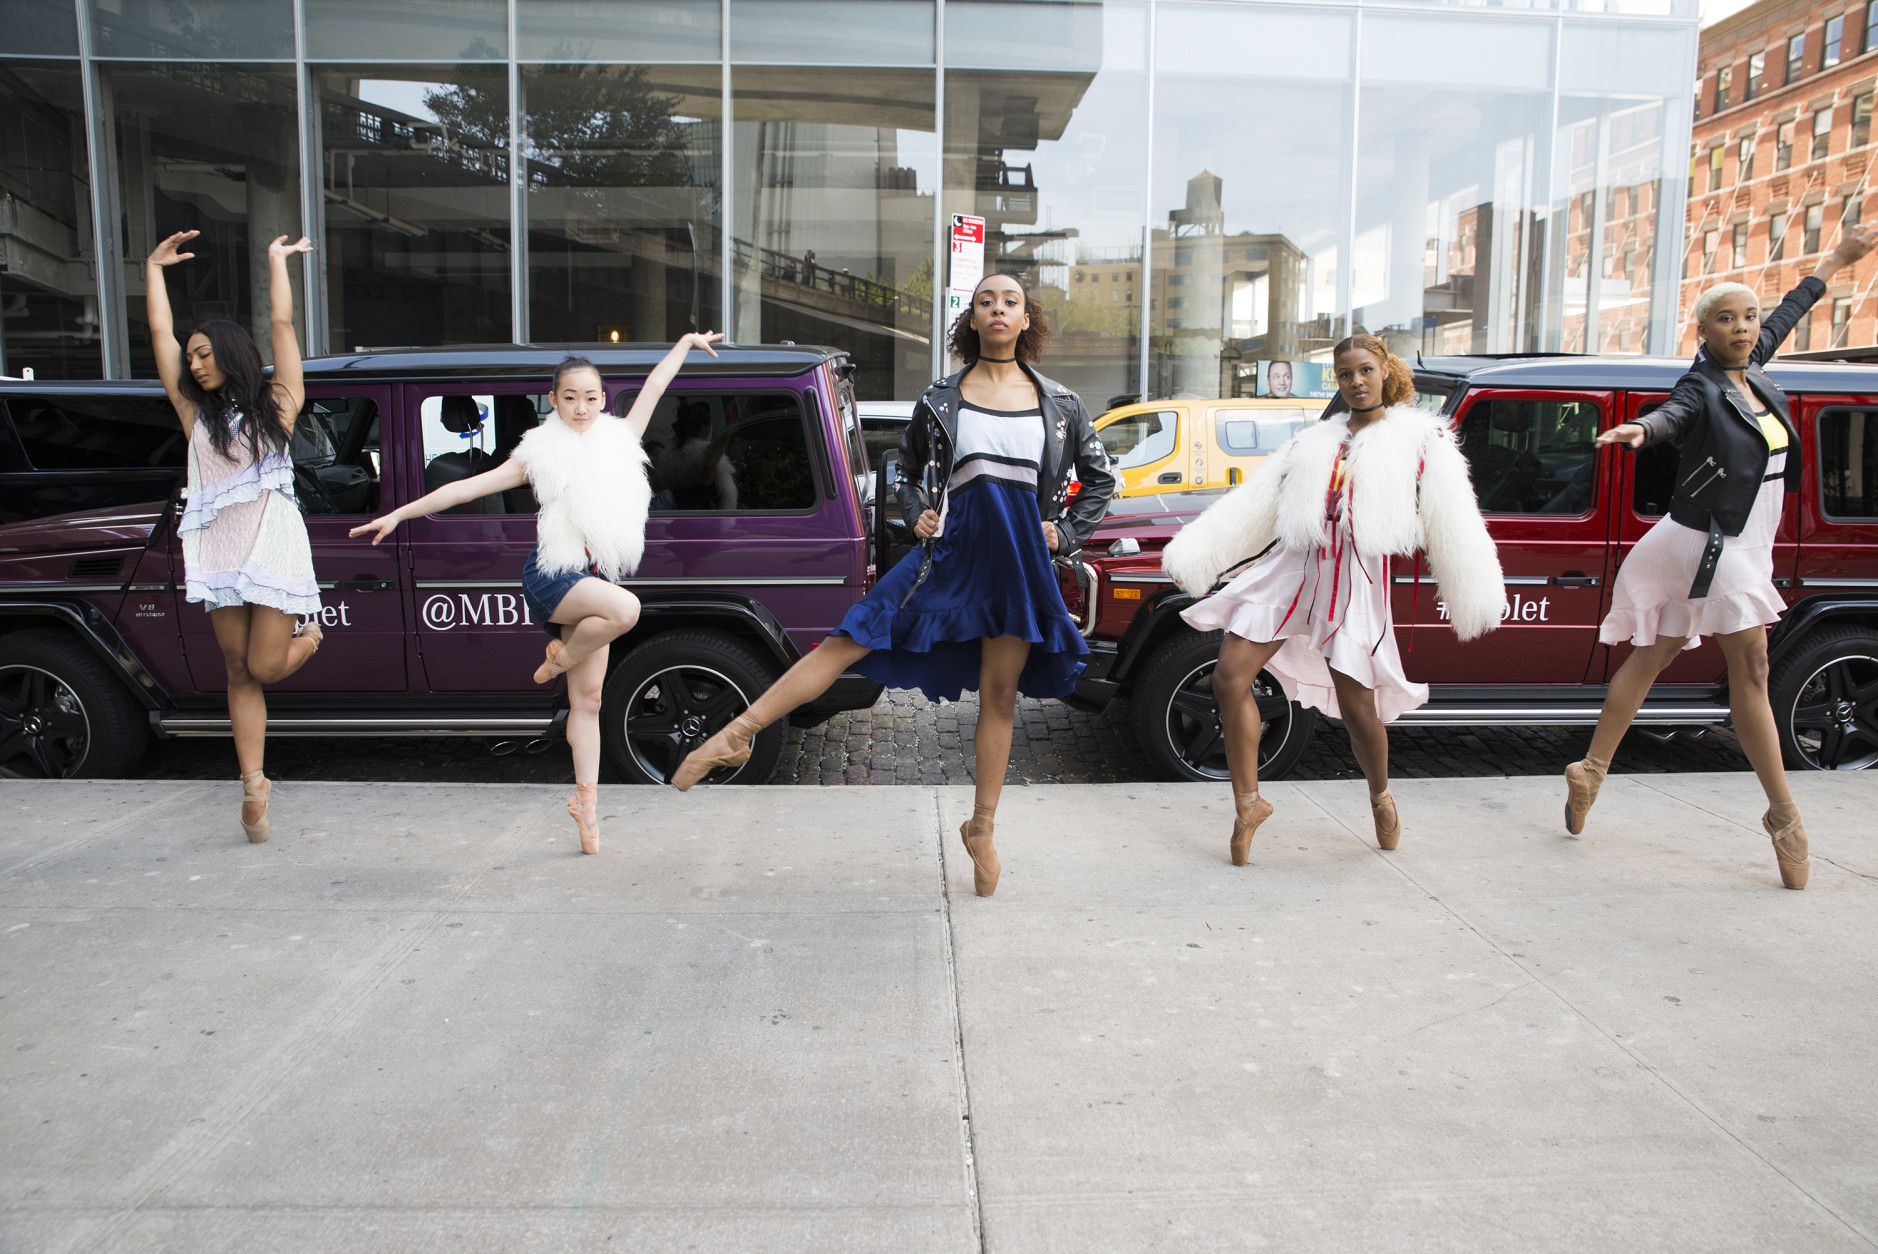 NEW YORK, NY - SEPTEMBER 12:  Mercedes-Benz and the Hiplet Ballerinas stage a pop up live performance choreographed by Homer Bryant in front of New York City's The Standard, High Line on September 12, 2016 in New York City. The dancers performed to music by Christoph Hillekamps aka Chhhhhh, wearing a selection of signature pieces from New York designer Sandy Liang, who presented her Spring/Summer 2017 collection as part of New York Fashion Week.  (Photo by Jenny Anderson/Getty Images for Mercedes-Benz)